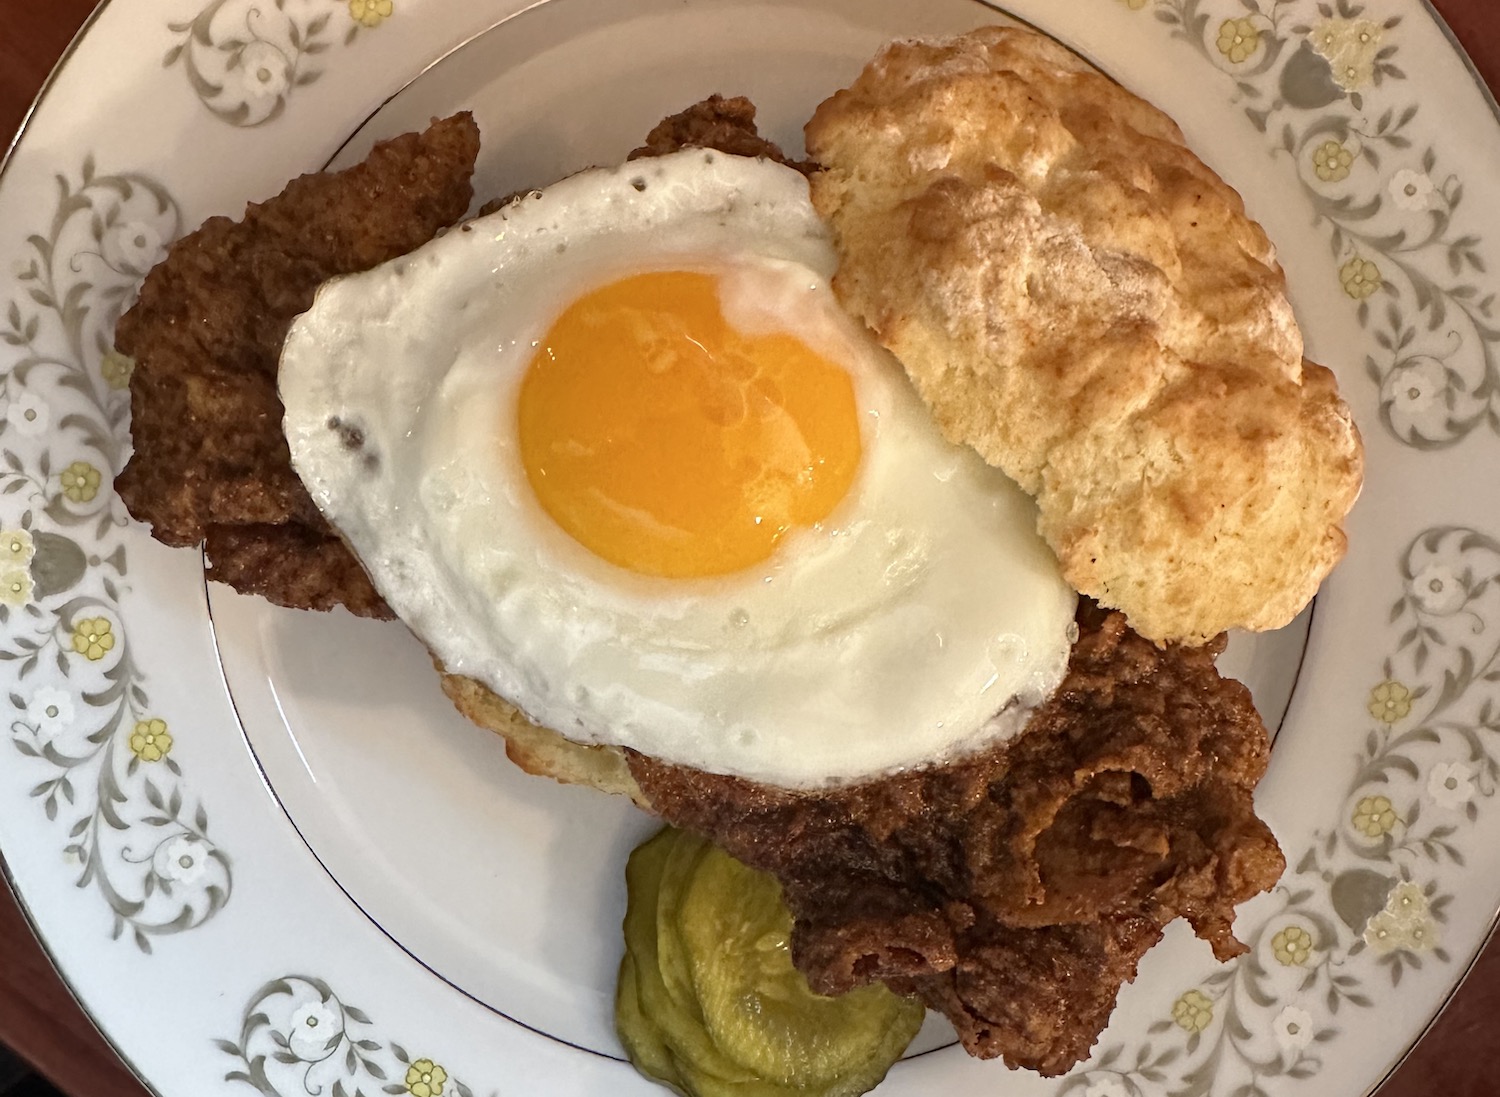 Egg and chicken and biscuit on a plate 